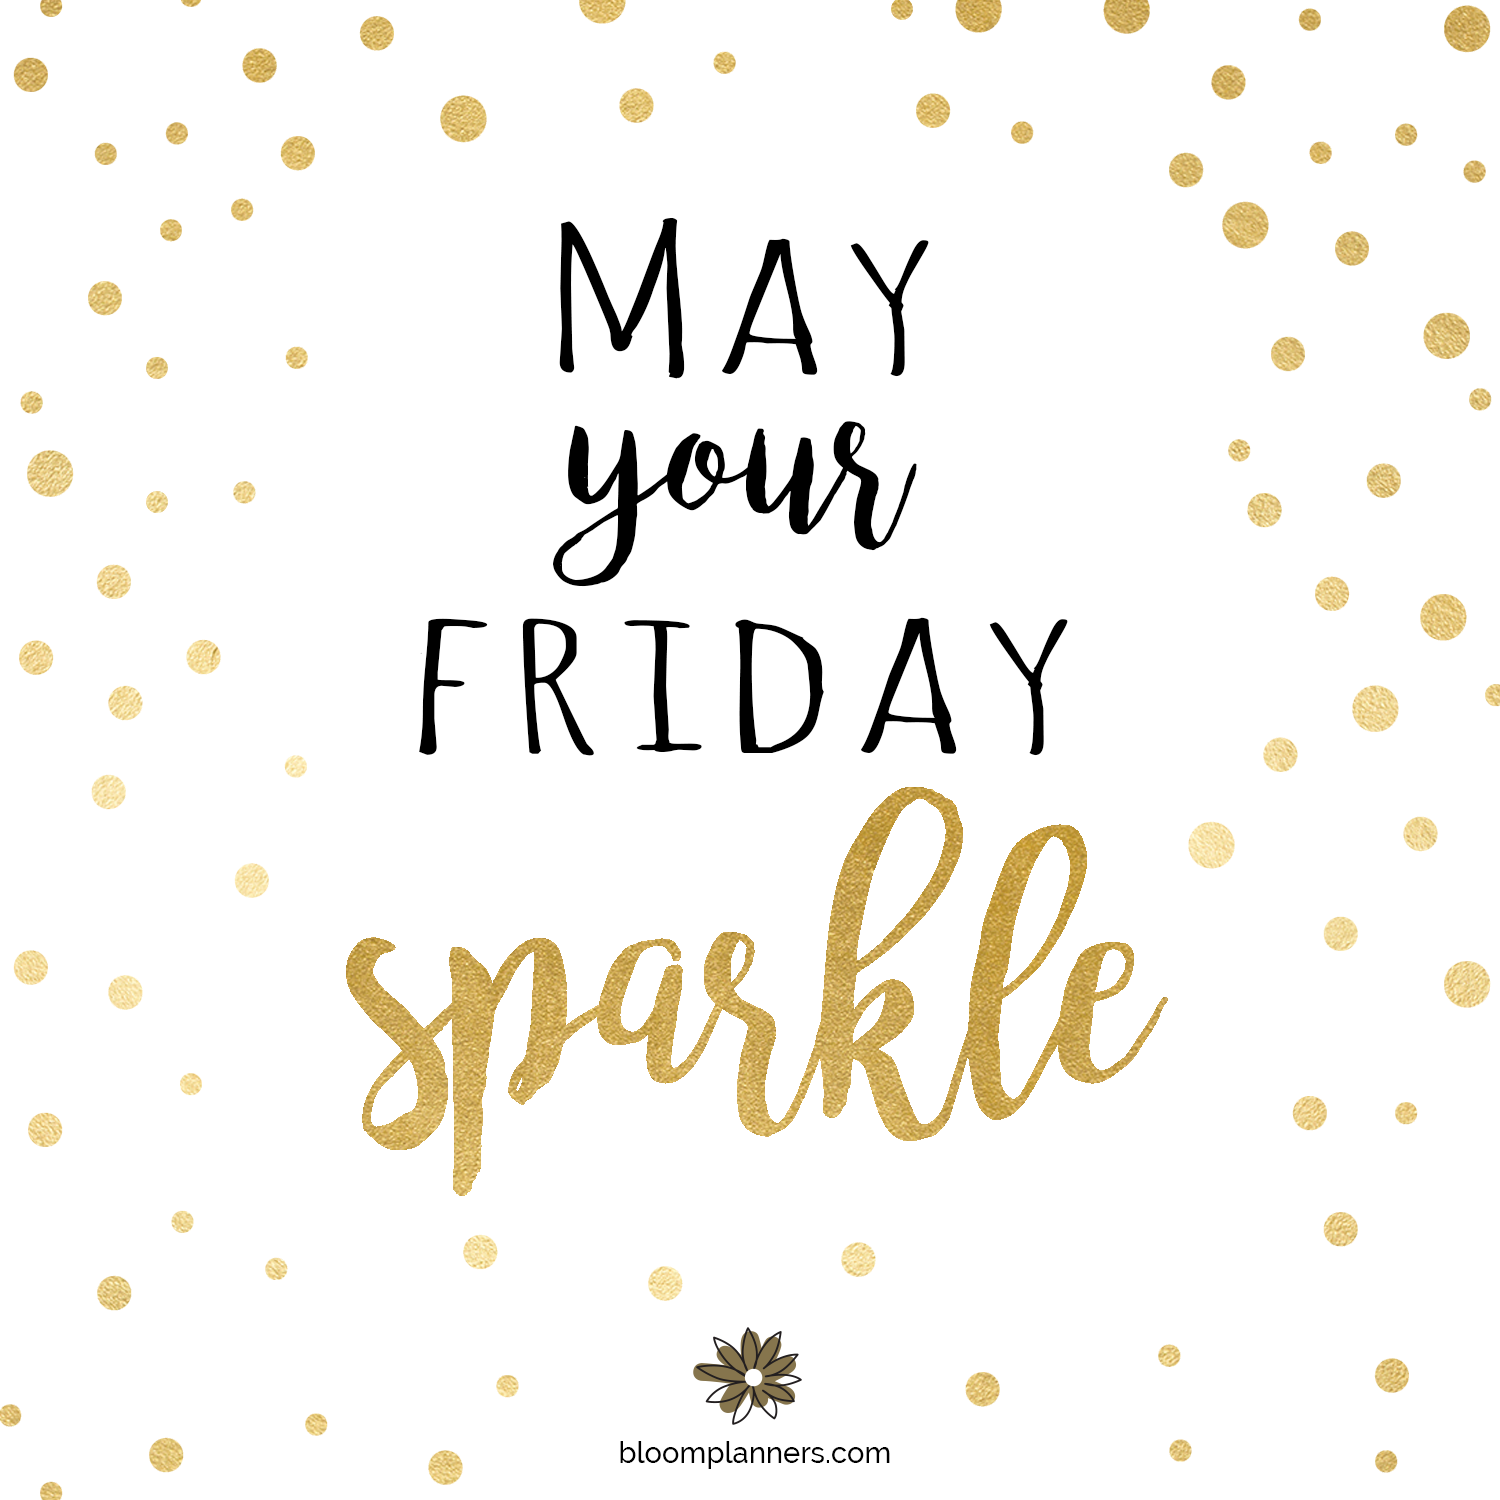 May Your Friday Sparkle